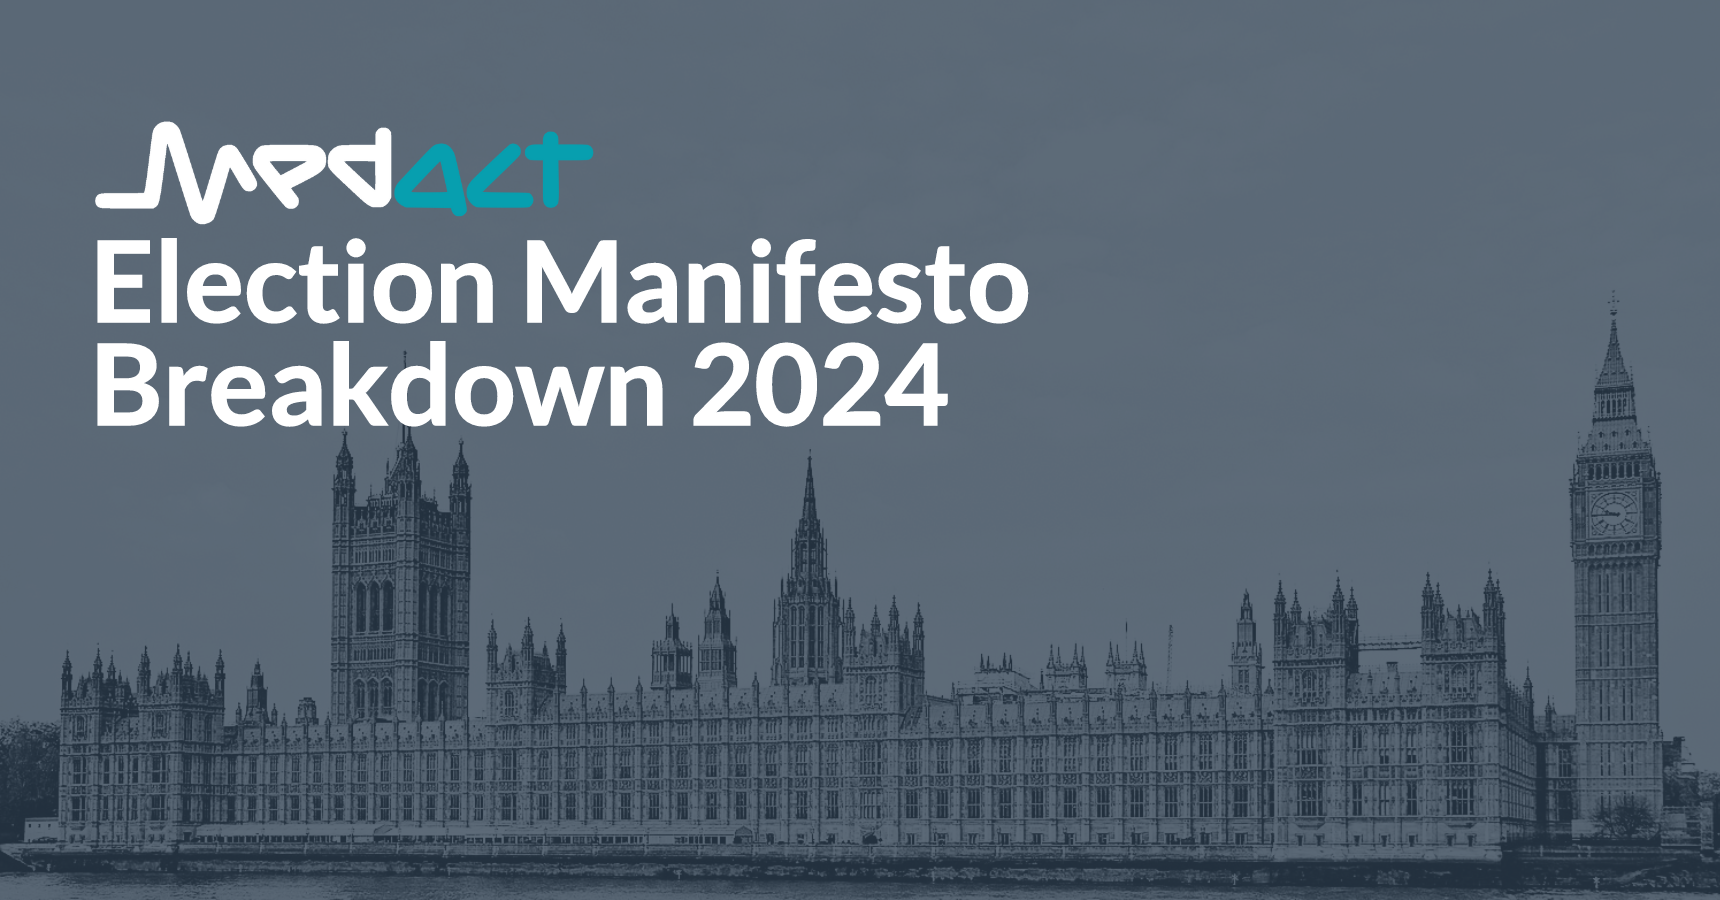 Medact Manifesto Breakdown 2024: text over greyscale image of Westminster Parliament